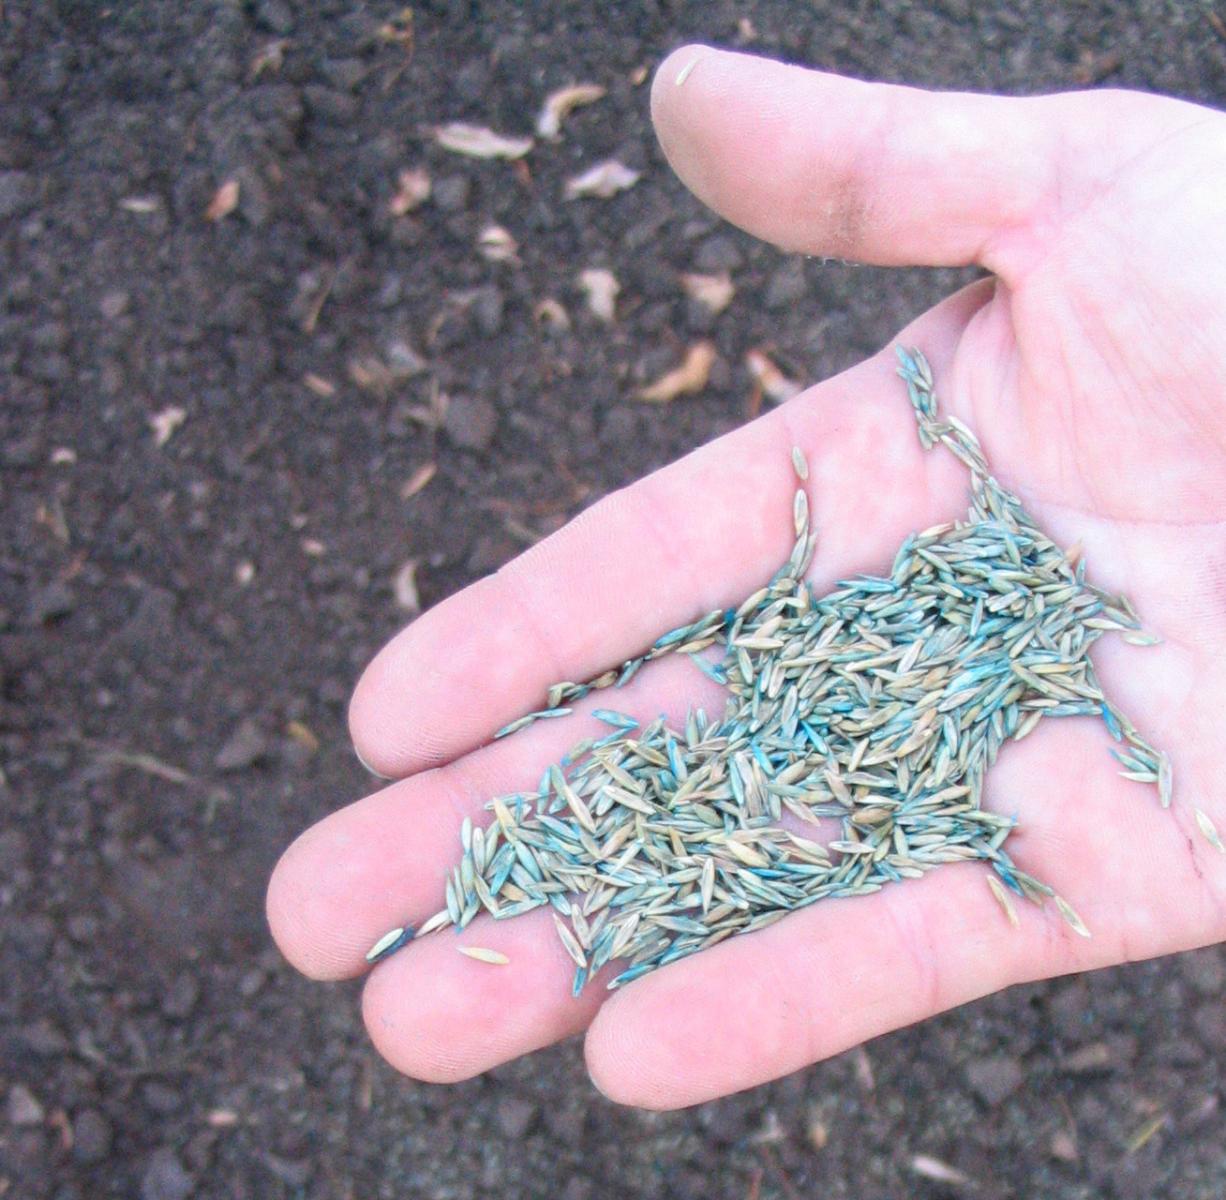 Picture of seeding grass.